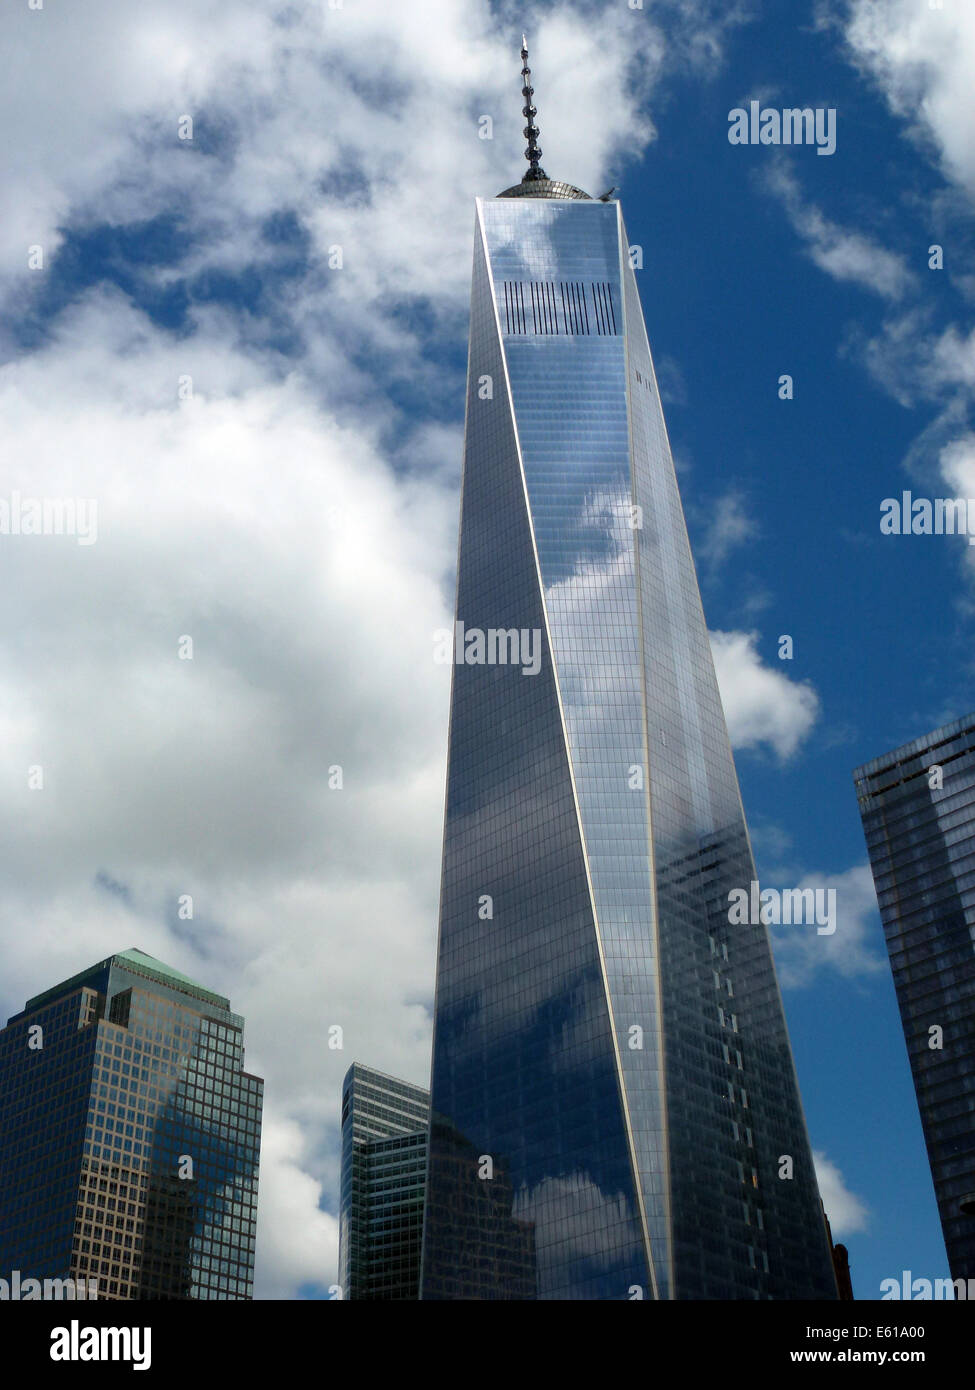 Clouds mirror on the facade of One World Trade Center (WTC 1) office highrise, previously known as the Freedom Tower, situated adjacent to the World Financial Center (WFC) (L) in New York City, USA, 20 August 2014. The WTC 1 skyscraper was constructed on the site also known as Ground Zero, which saw the destruction of the World Trade Center in the terrorist attack on 11 September 2001. The building which has been under construction since 2006 is the tallest highrise in the United States, measuring 541.3 metres. Photo: Alexandra Schuler/dpa - NO WIRES SERVICE - Stock Photo